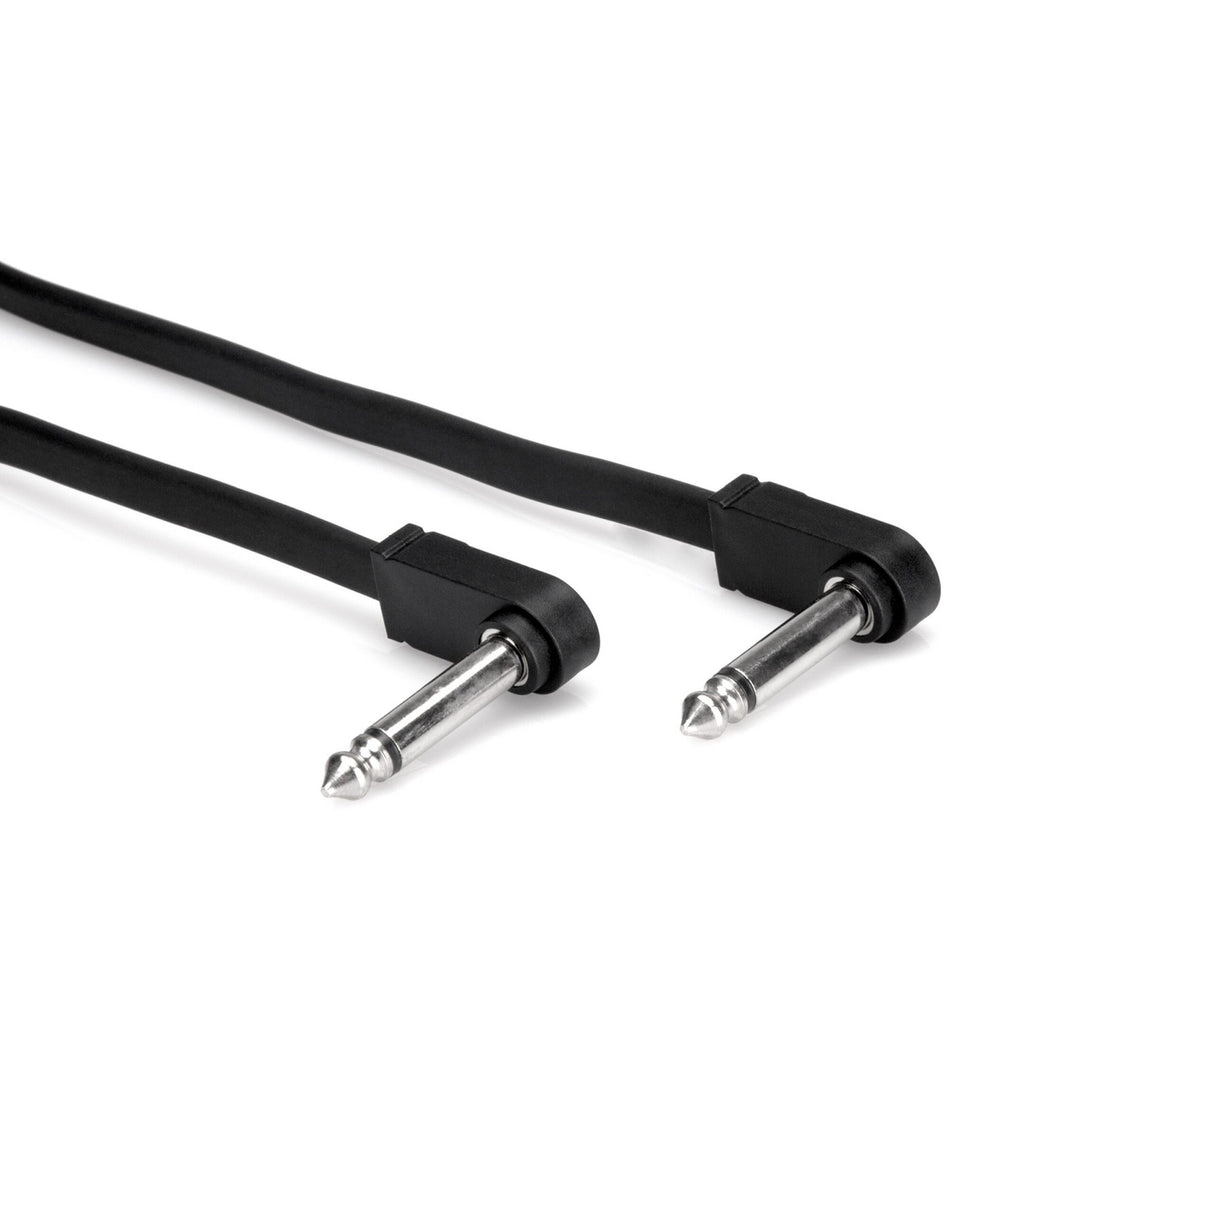 Hosa CFP-118 Molded Low-Profile Right-Angle to Same Flat Guitar Patch Cable, 18 Inch